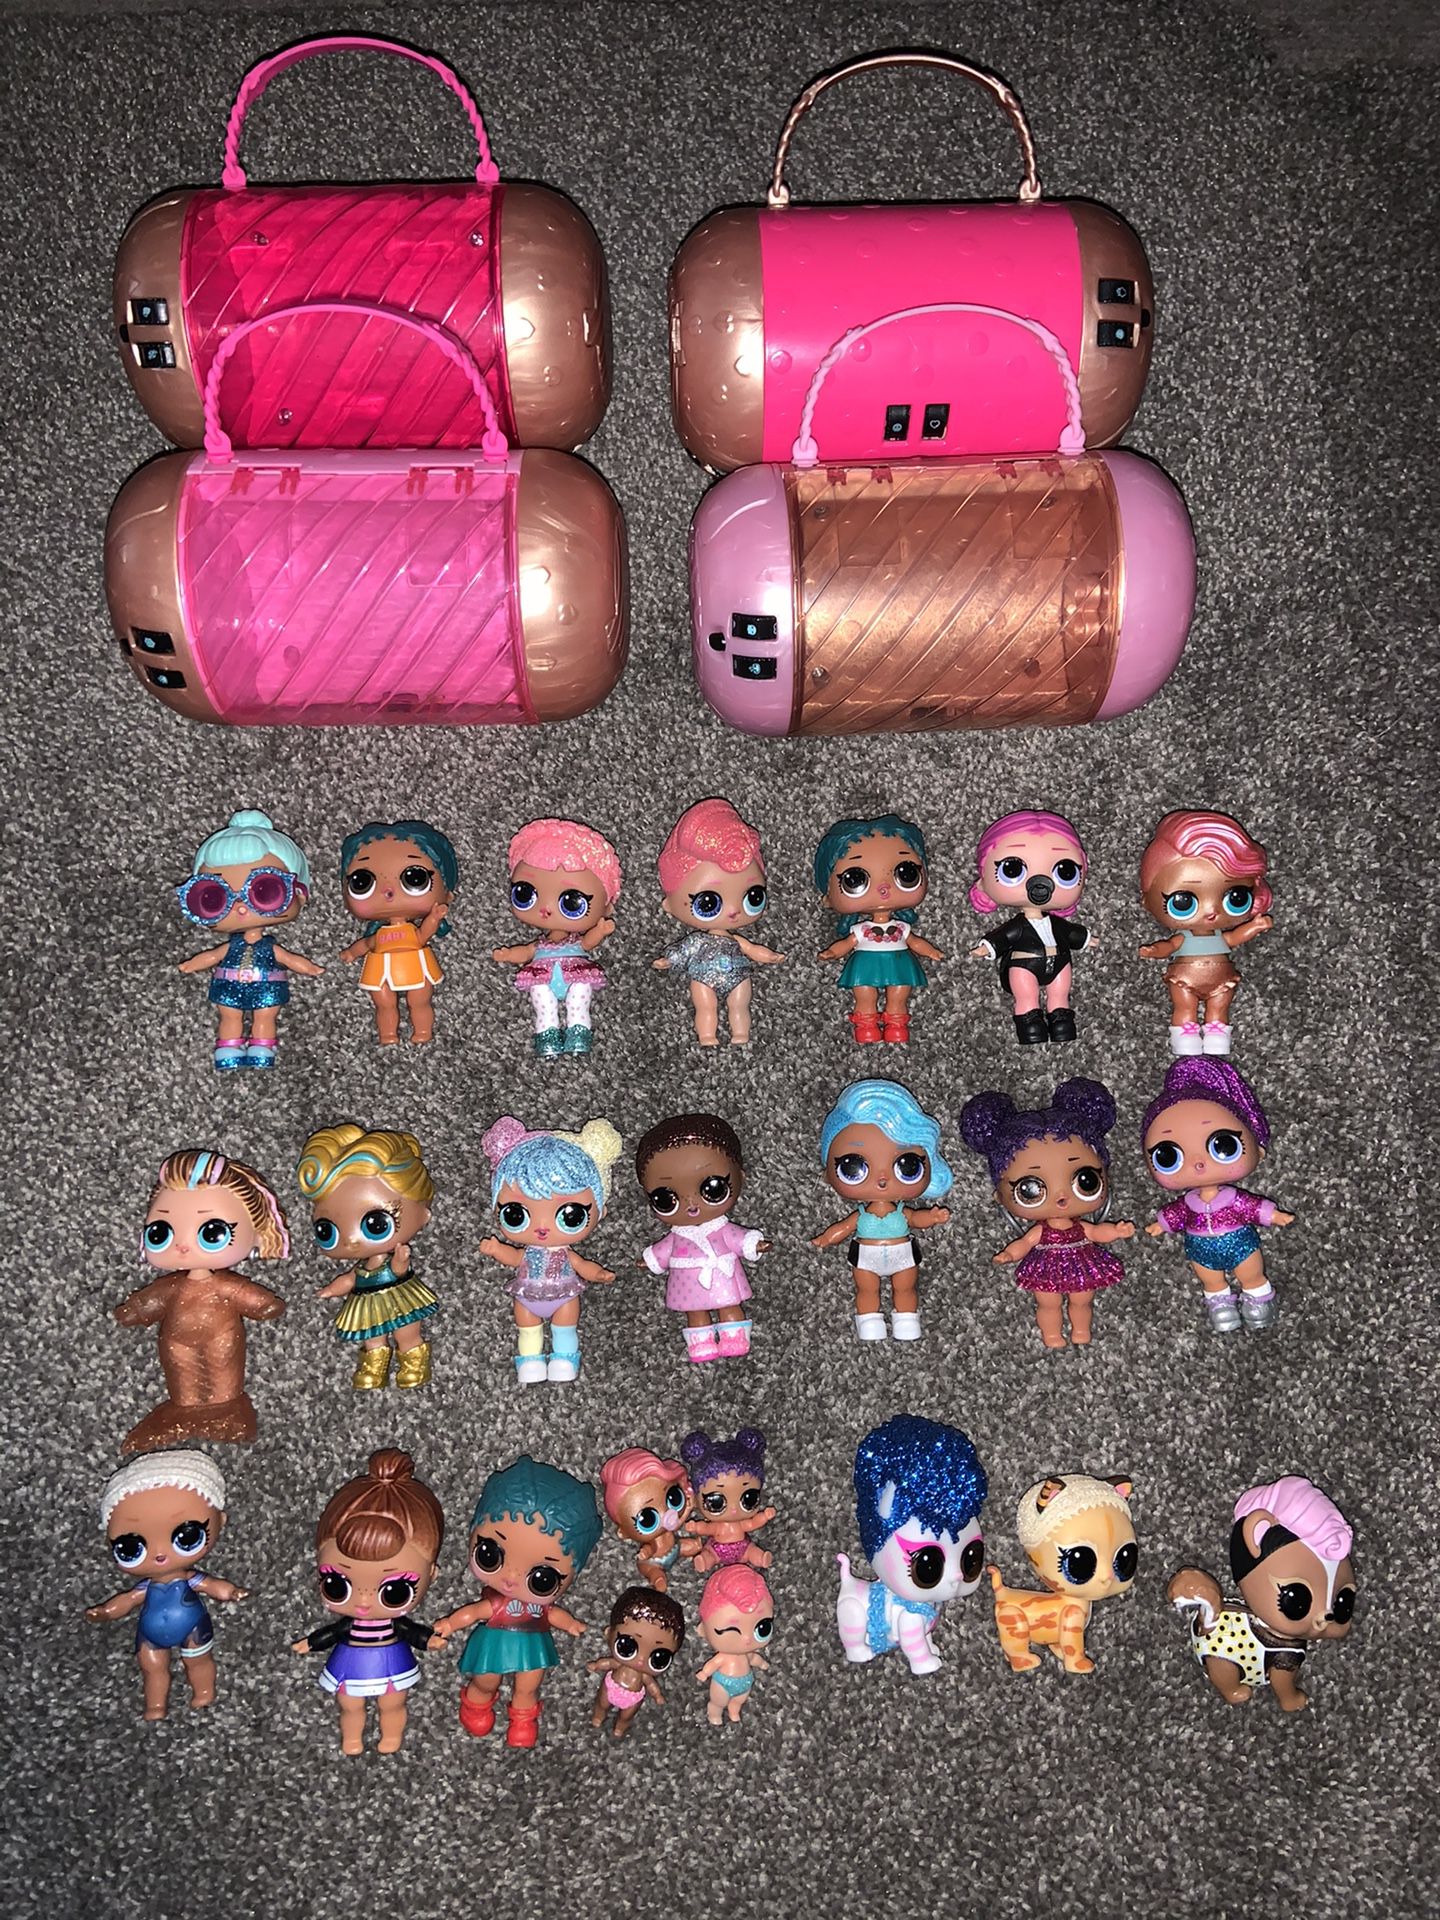 Lot of LOL dolls and accessories